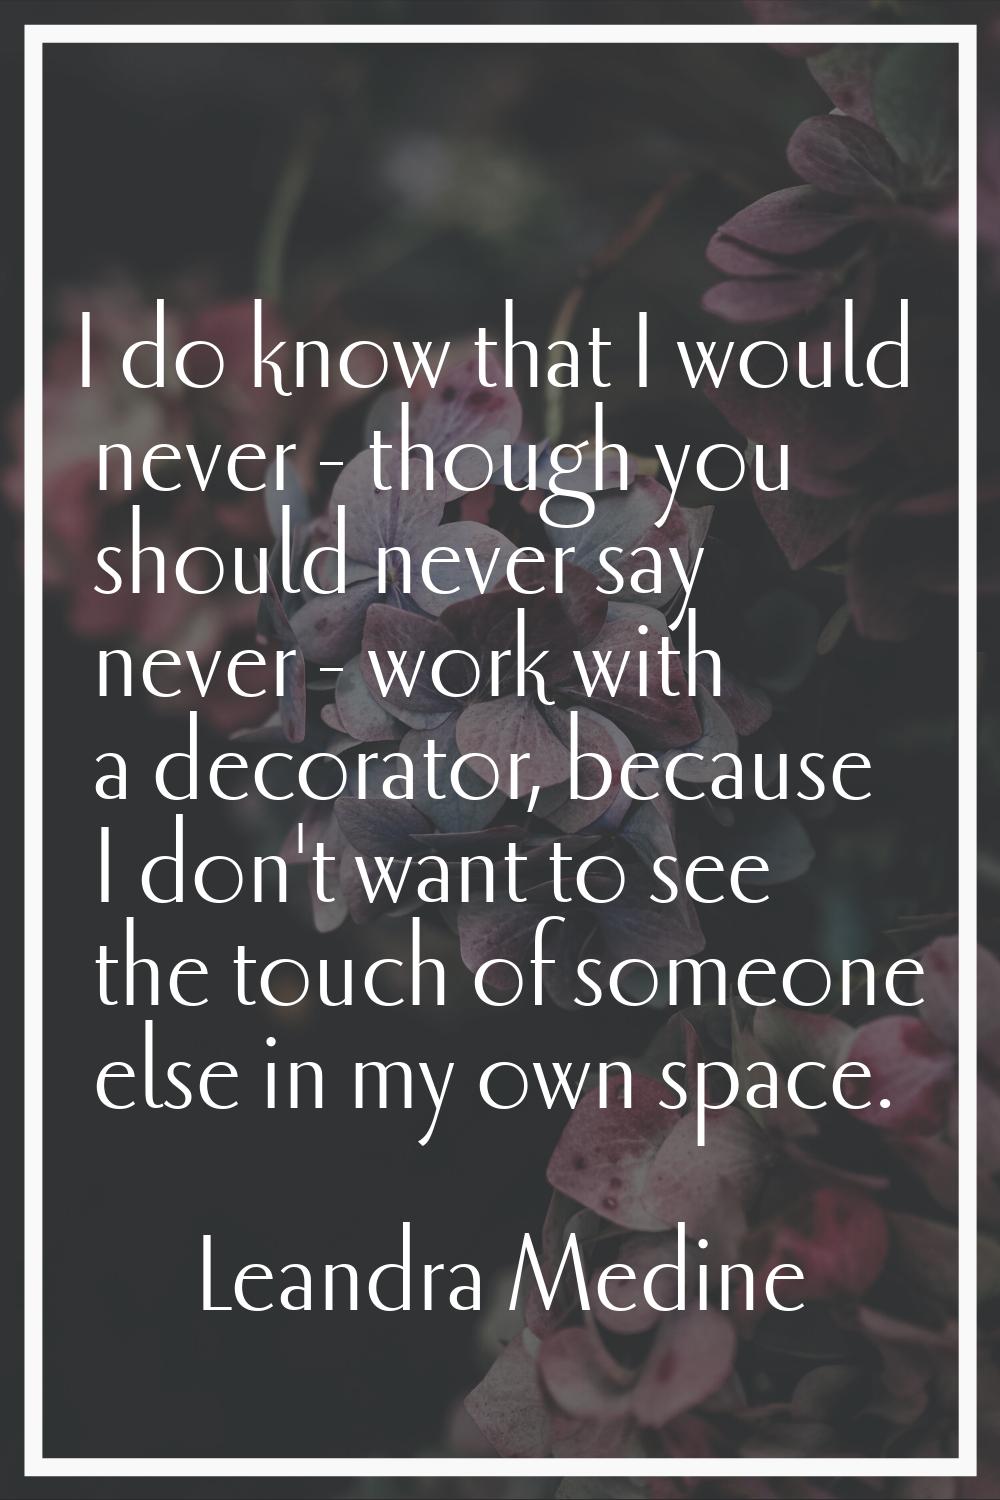 I do know that I would never - though you should never say never - work with a decorator, because I